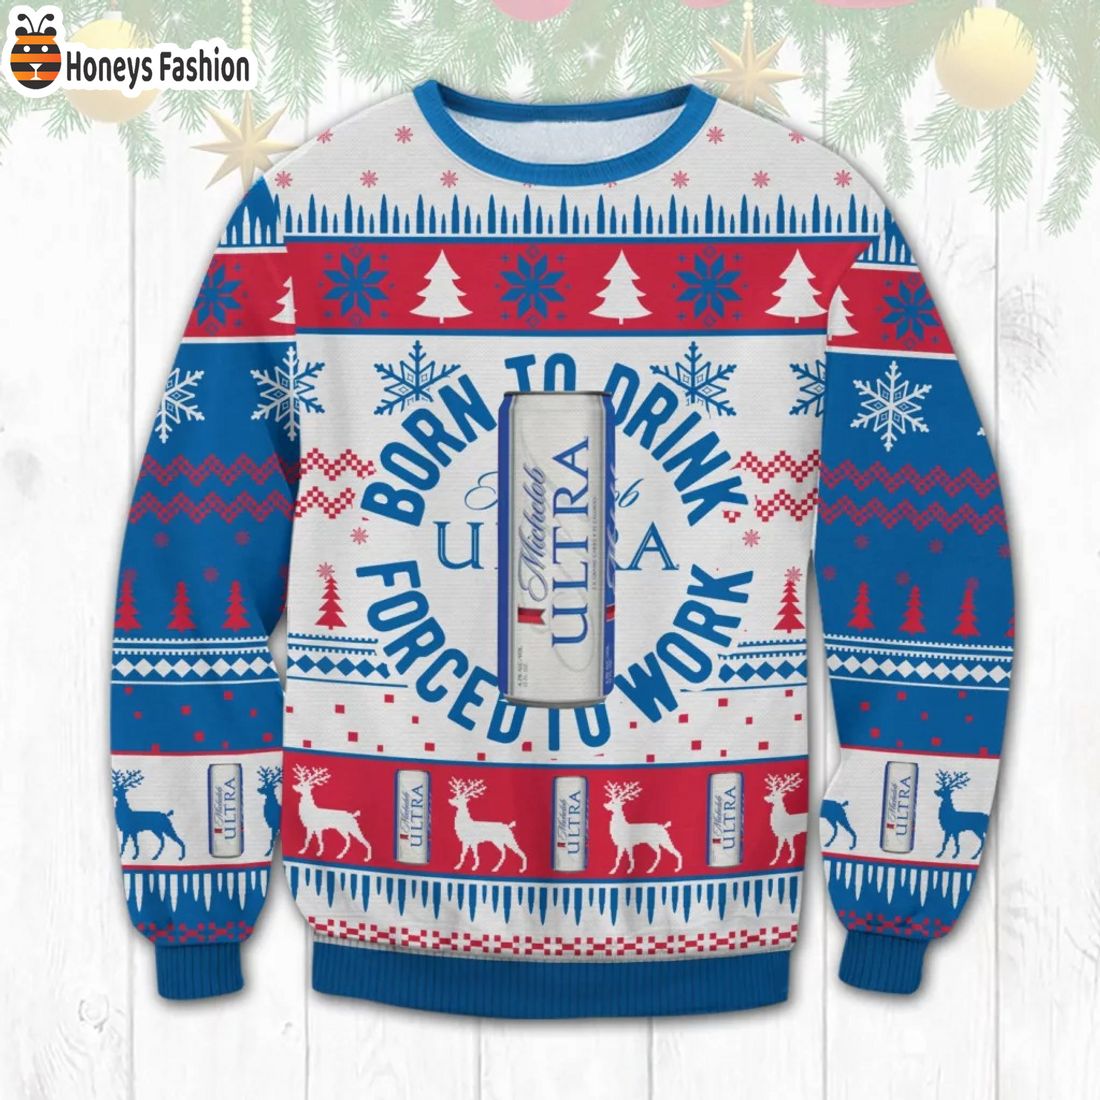 Michelob Ultra To Drink Force To Work Ugly Christmas Sweater